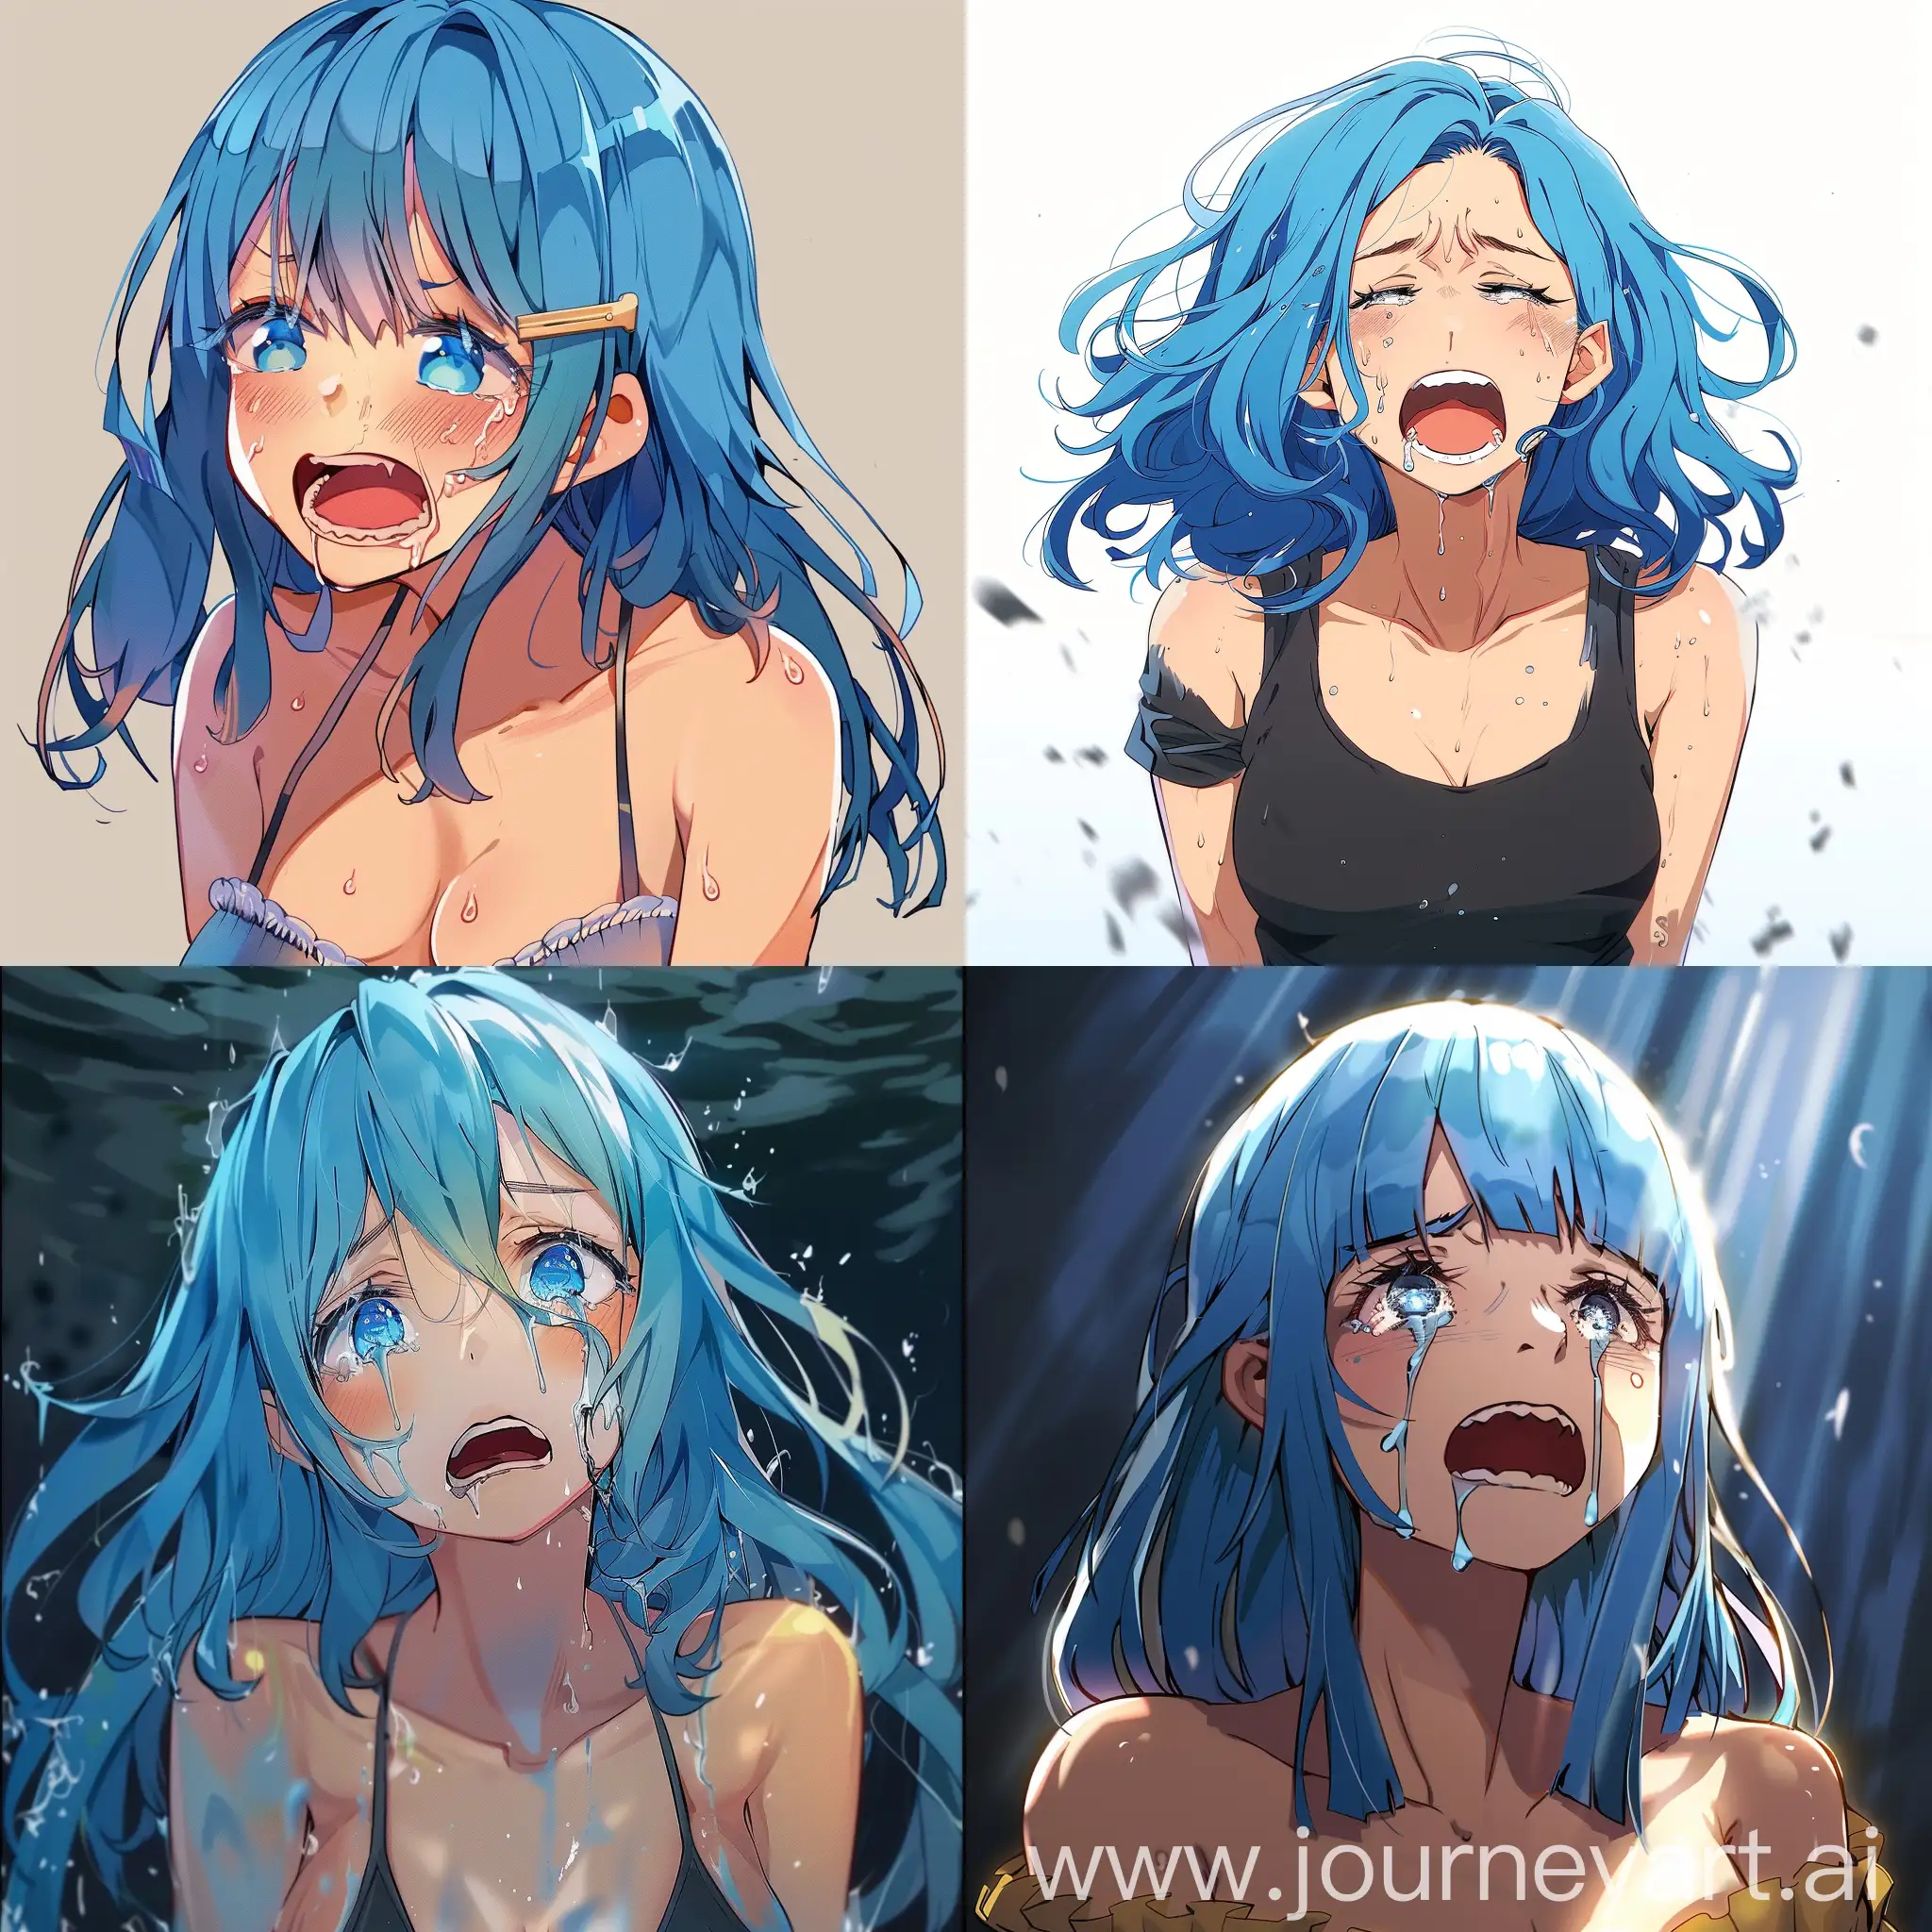 BlueHaired-Anime-Girl-Crying-in-Exquisite-Anguish